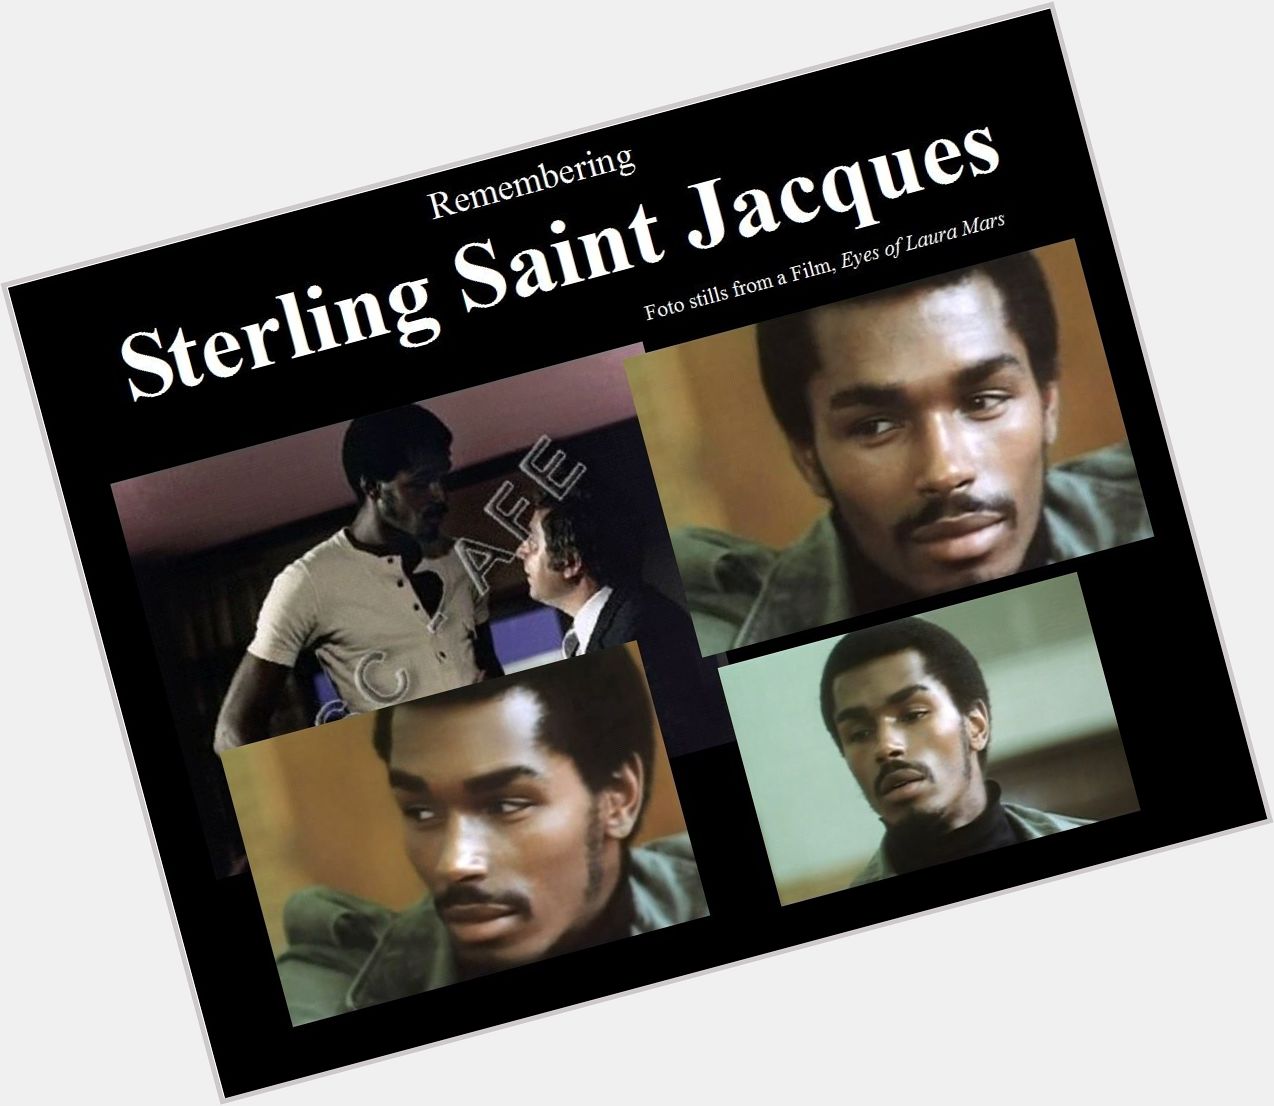 sterling st jacques eyes 3